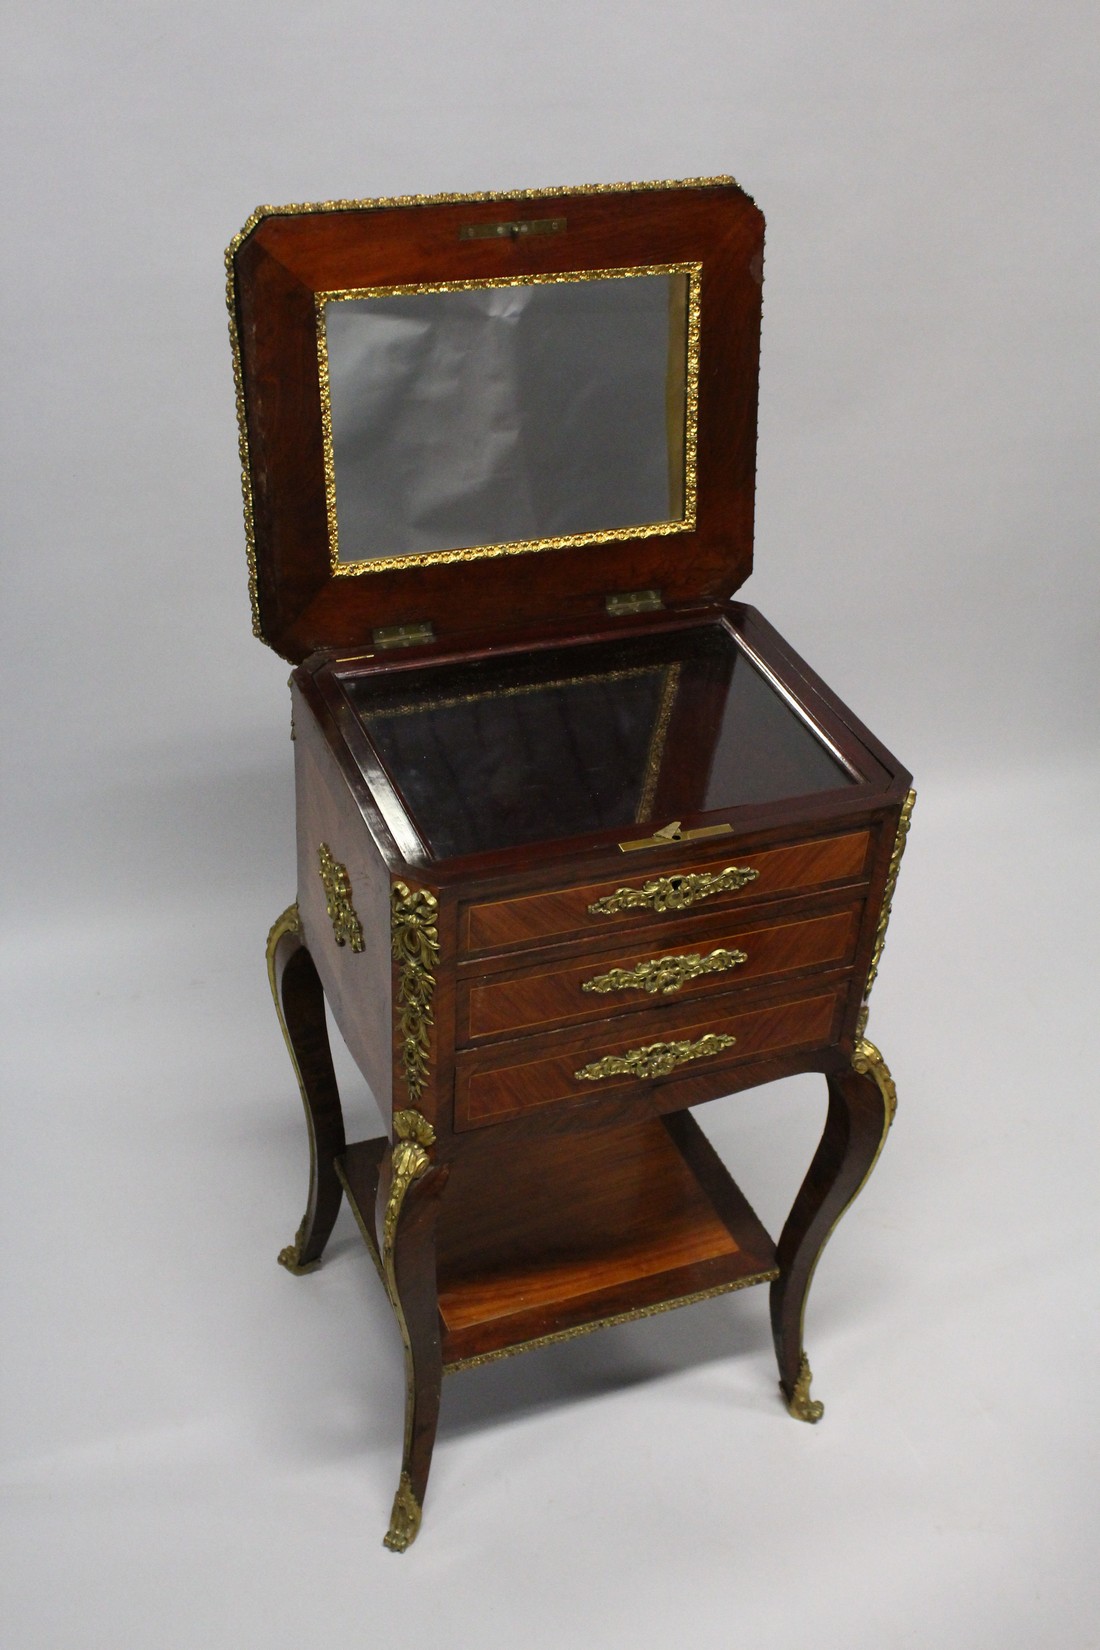 A SUPERB VICTORIAN ENGLISH LOUIS XV DISPLAY BIJOUTERIE STAND with cross banded quartered top with - Image 3 of 8